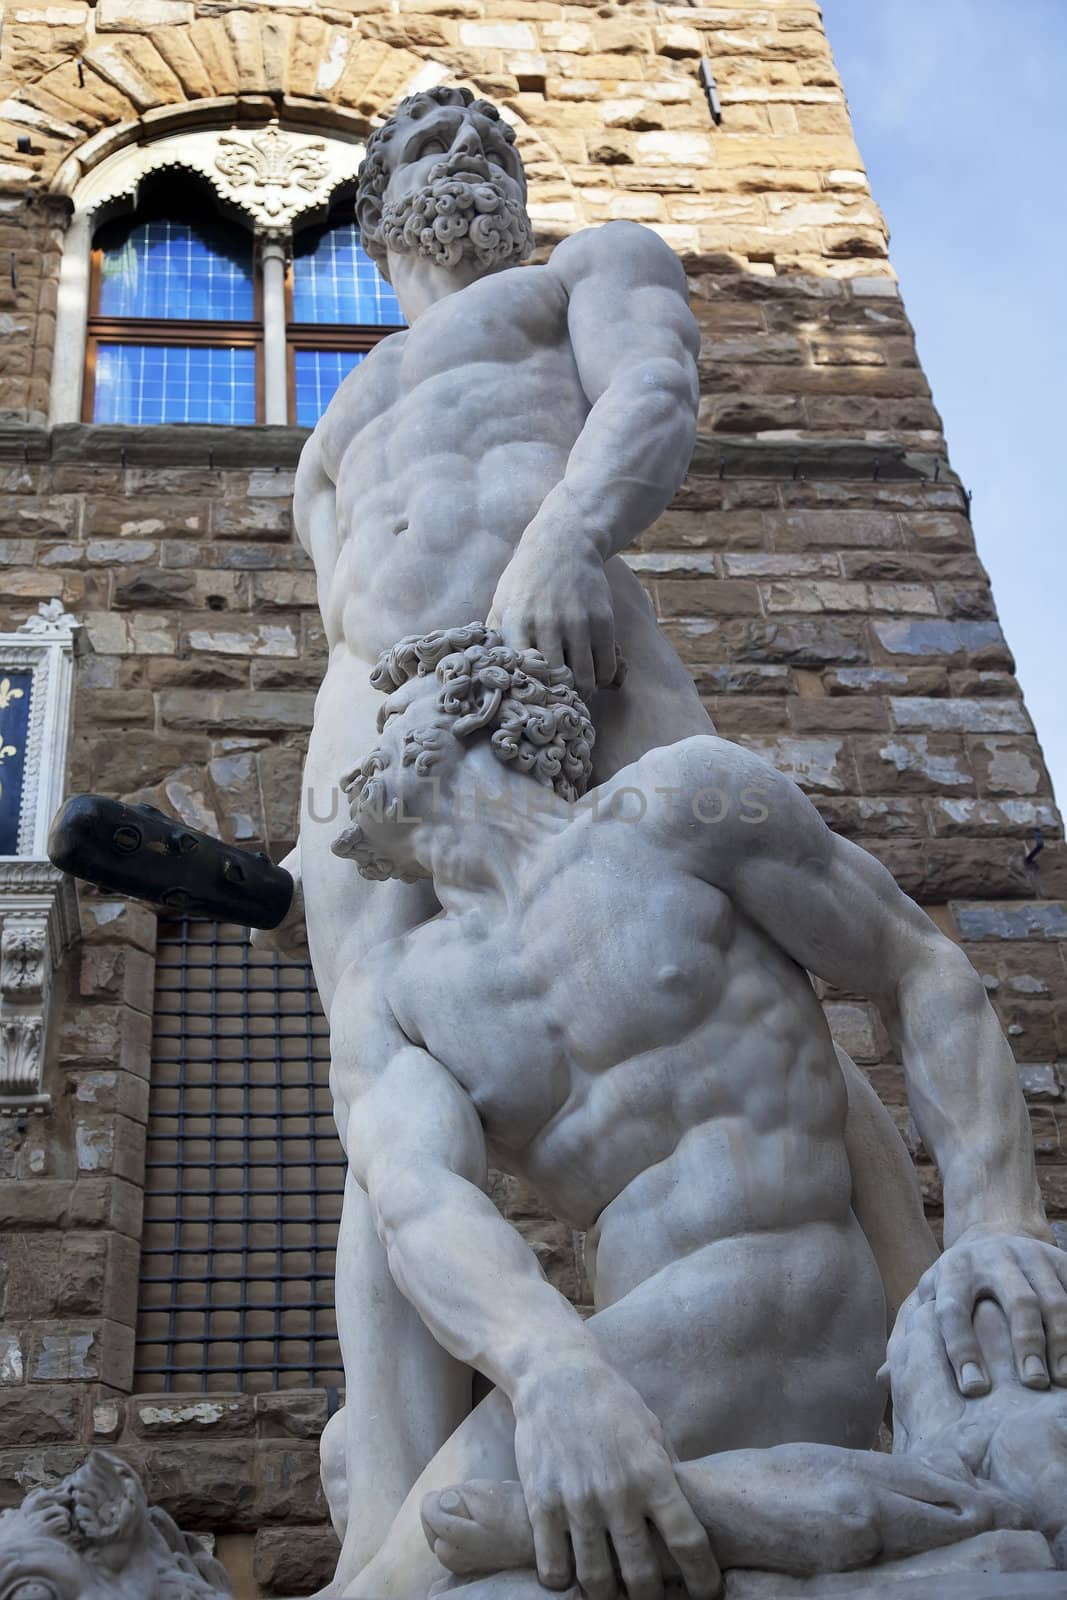 Banidinelli Hercules Statue Palazzo Vecchio Florence Italy by bill_perry